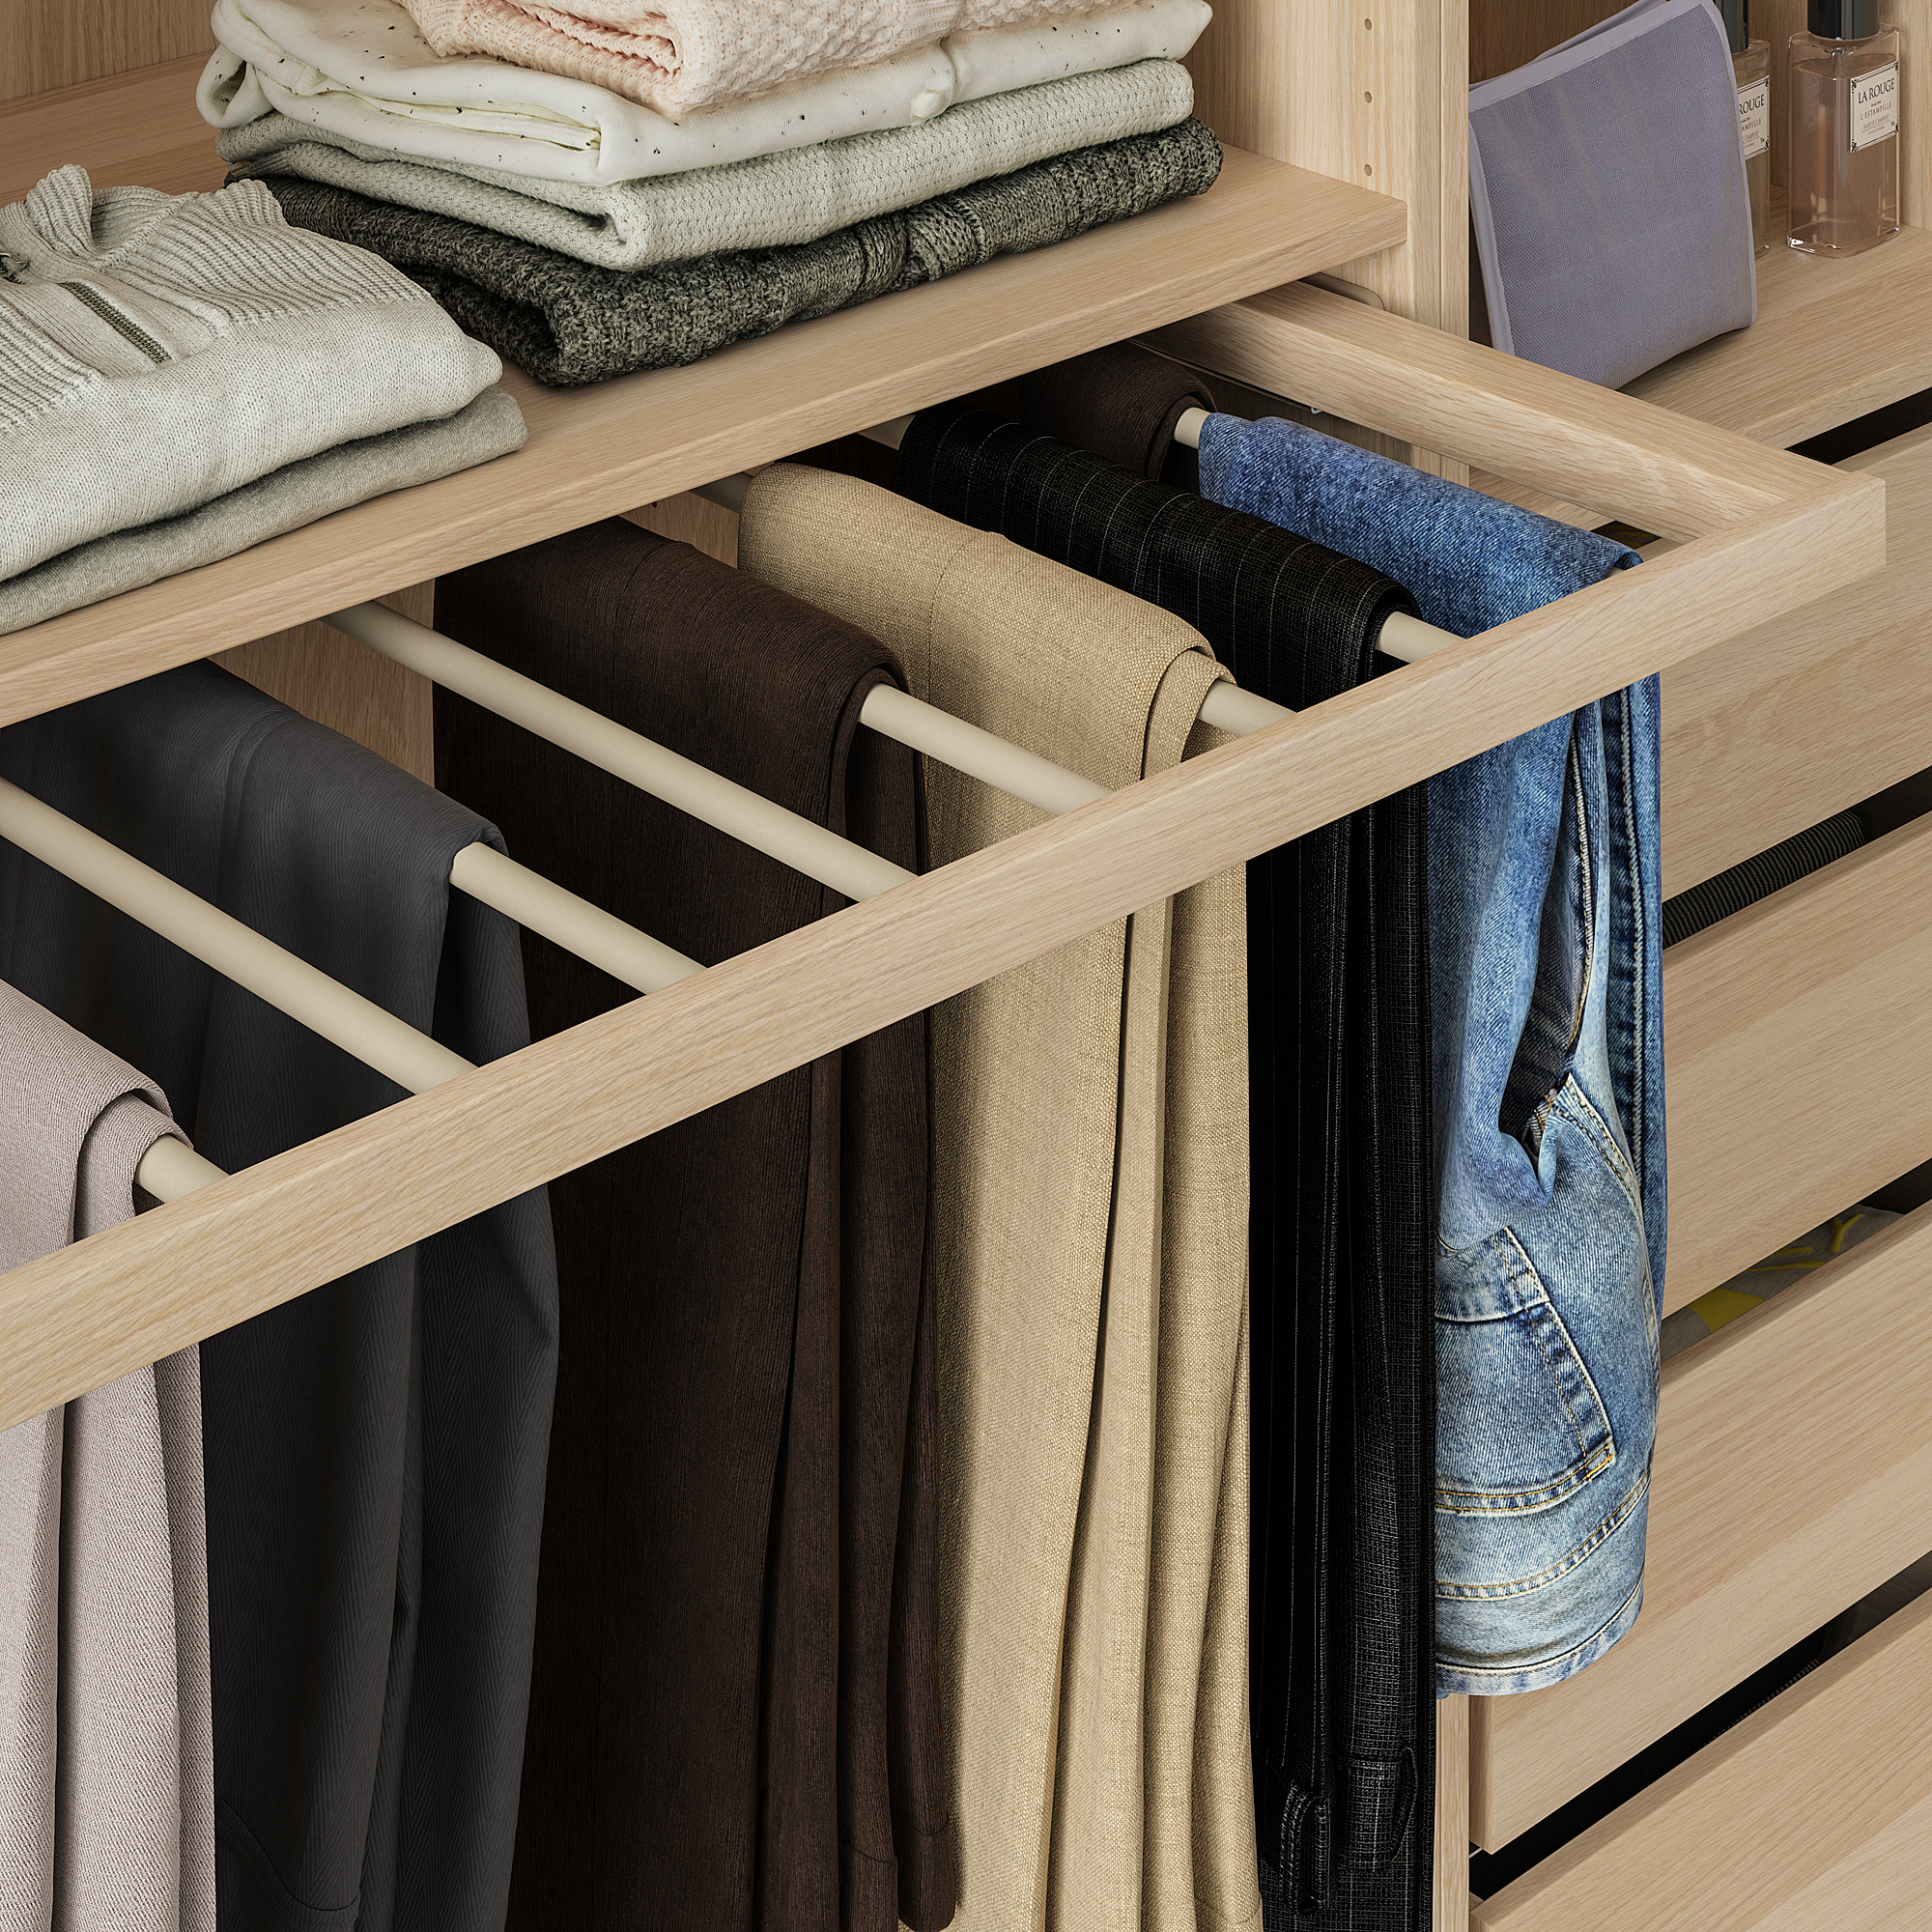 Wardrobe Clothes Storage Trousers Rack Armoire Telescopic Pants Holder Push  Pull Damping Cabinet Dress Organizer Clothing Shelf From Putlite, $81.41 |  DHgate.Com